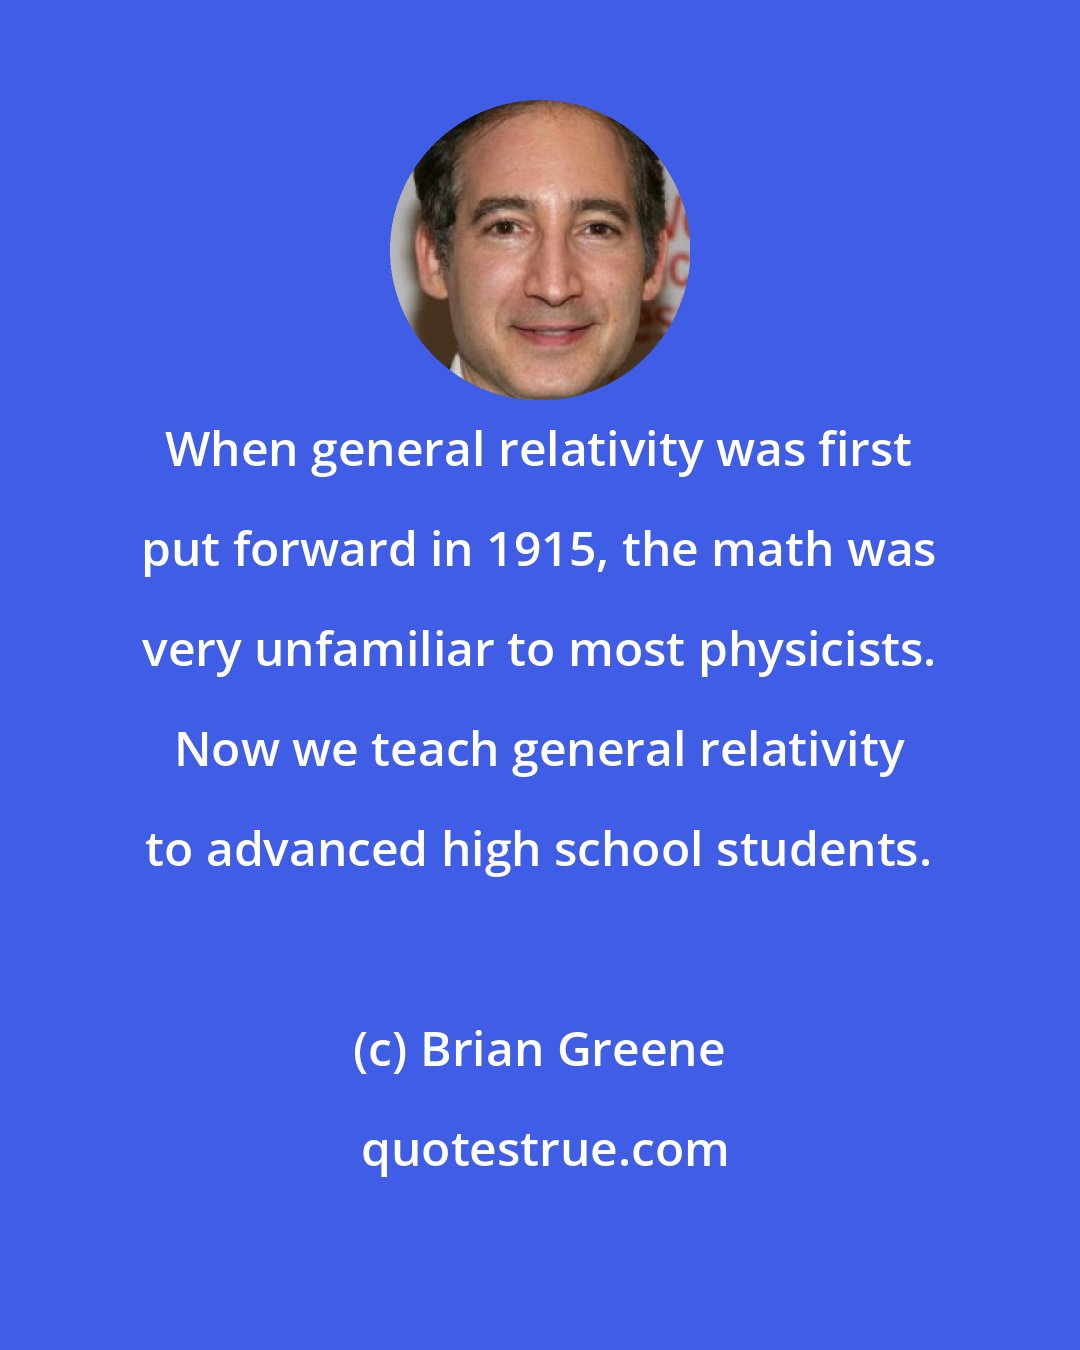 Brian Greene: When general relativity was first put forward in 1915, the math was very unfamiliar to most physicists. Now we teach general relativity to advanced high school students.